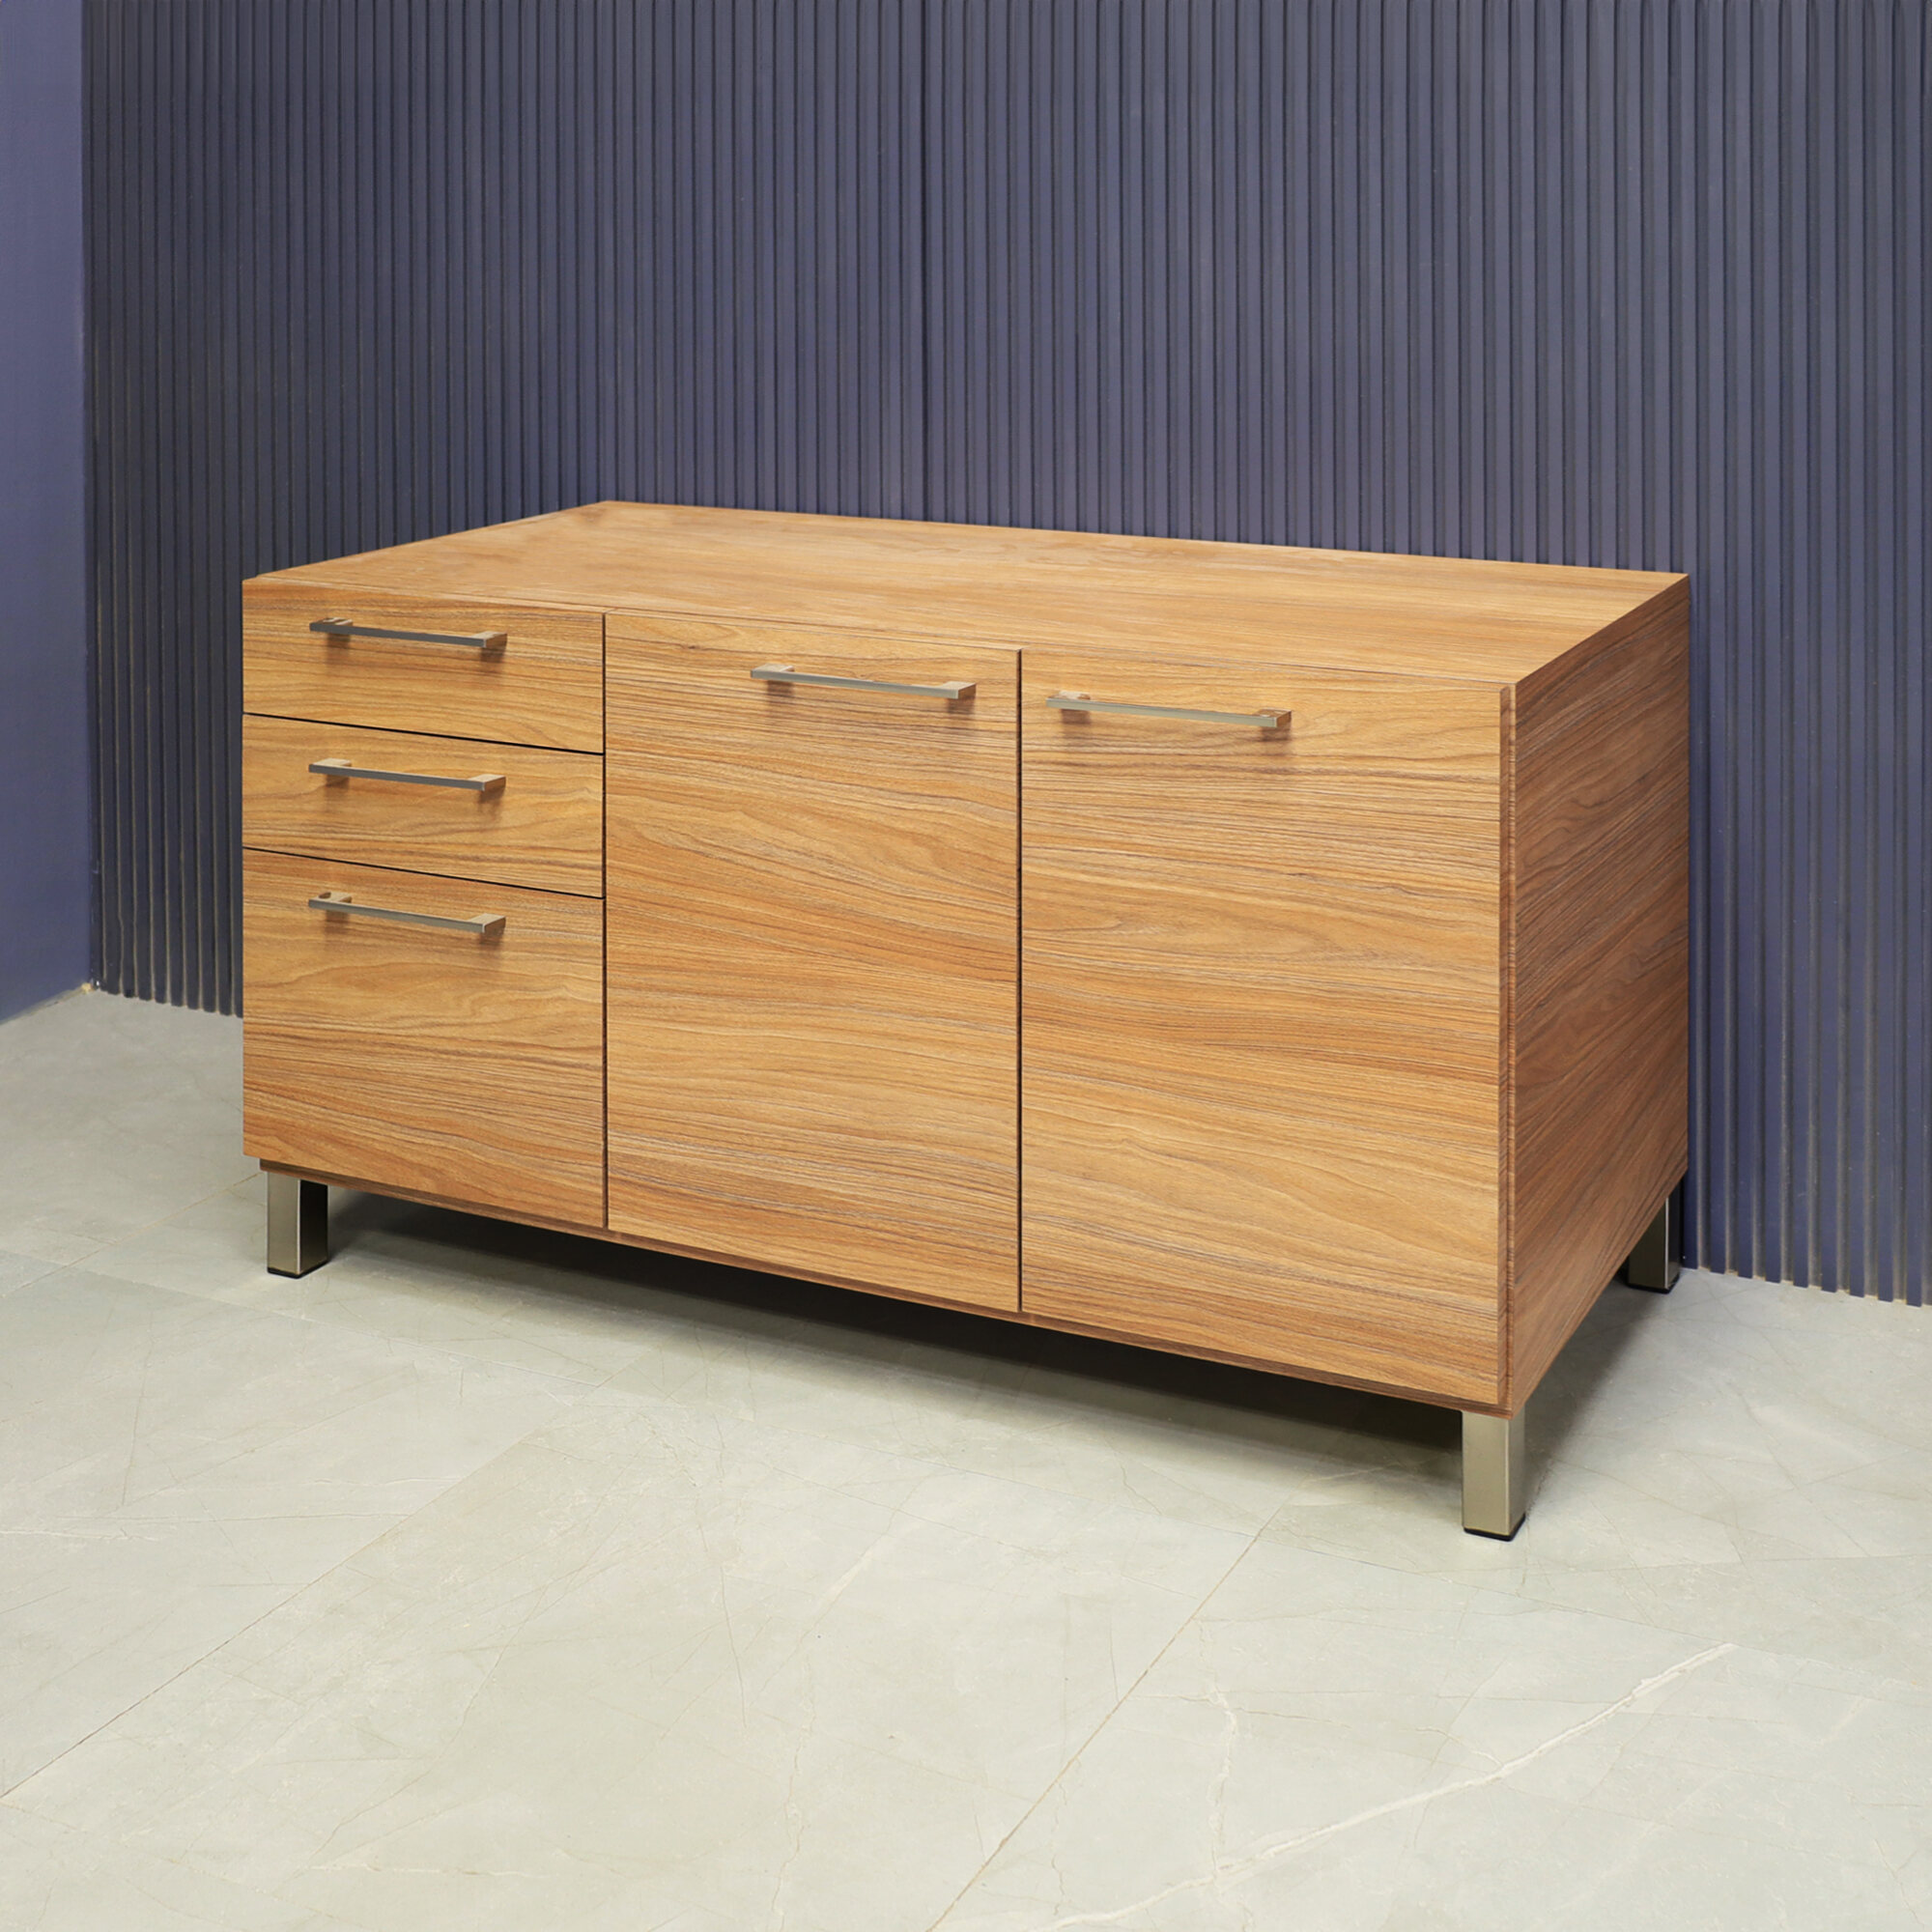 47-inch Naples Custom Storage Credenza in uptown walnut matte laminate credenza, front drawers & doors and brushed stainless steel legs and handles, shown here.